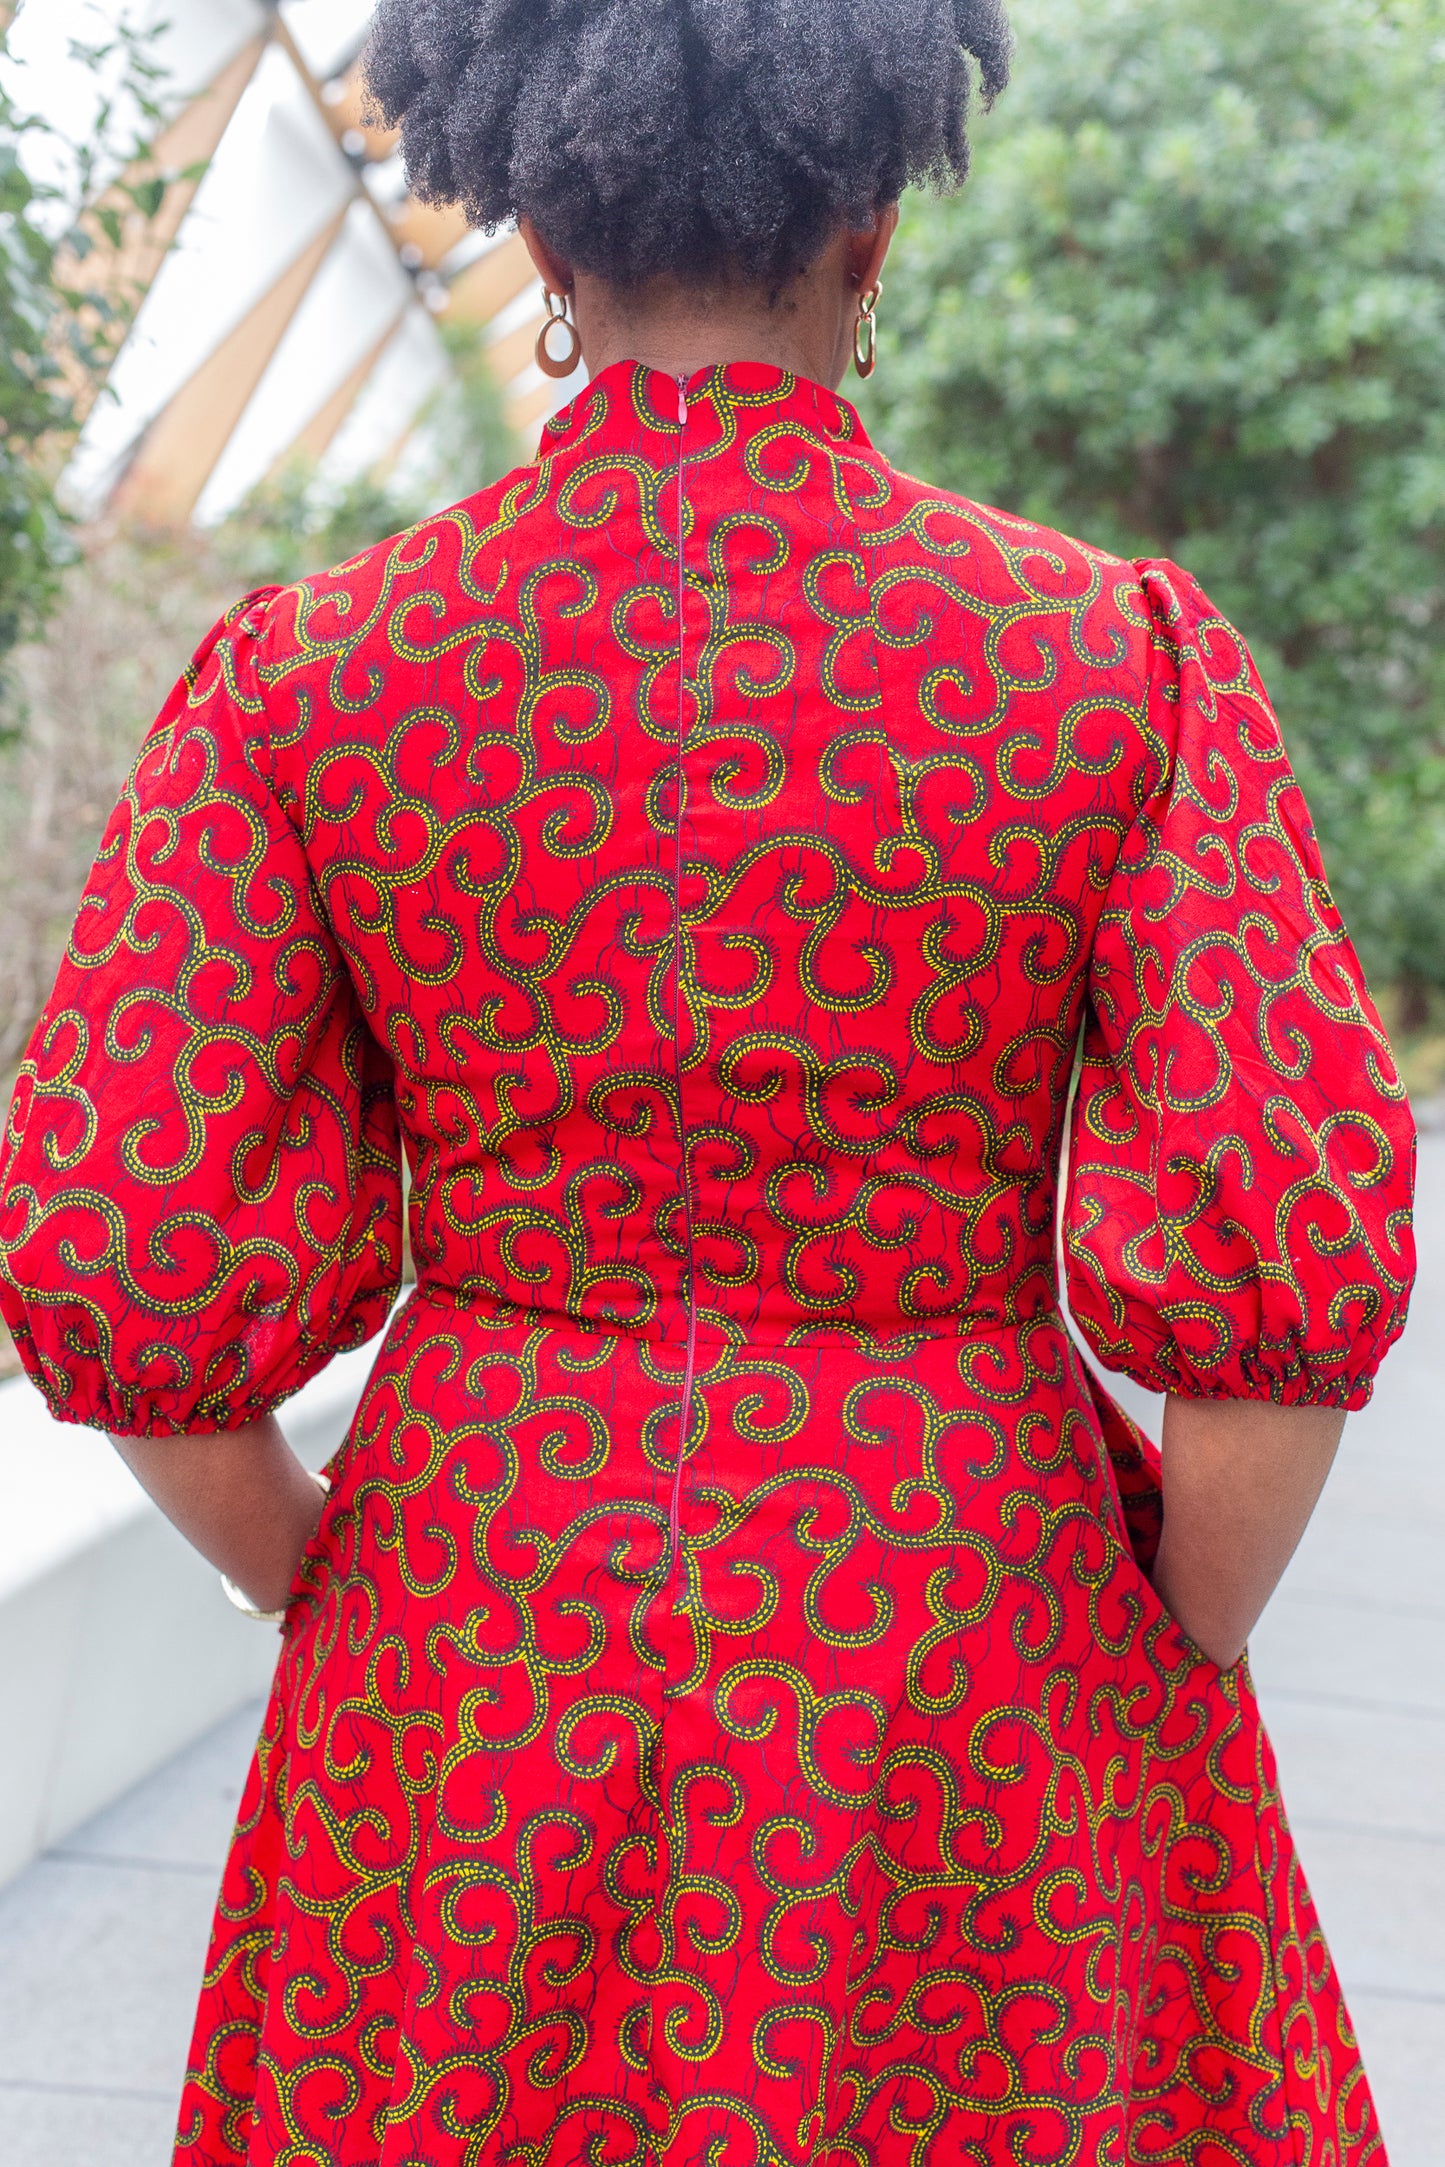 A rear view of the red dress, showcasing the zipper closure at the back for added functionality.